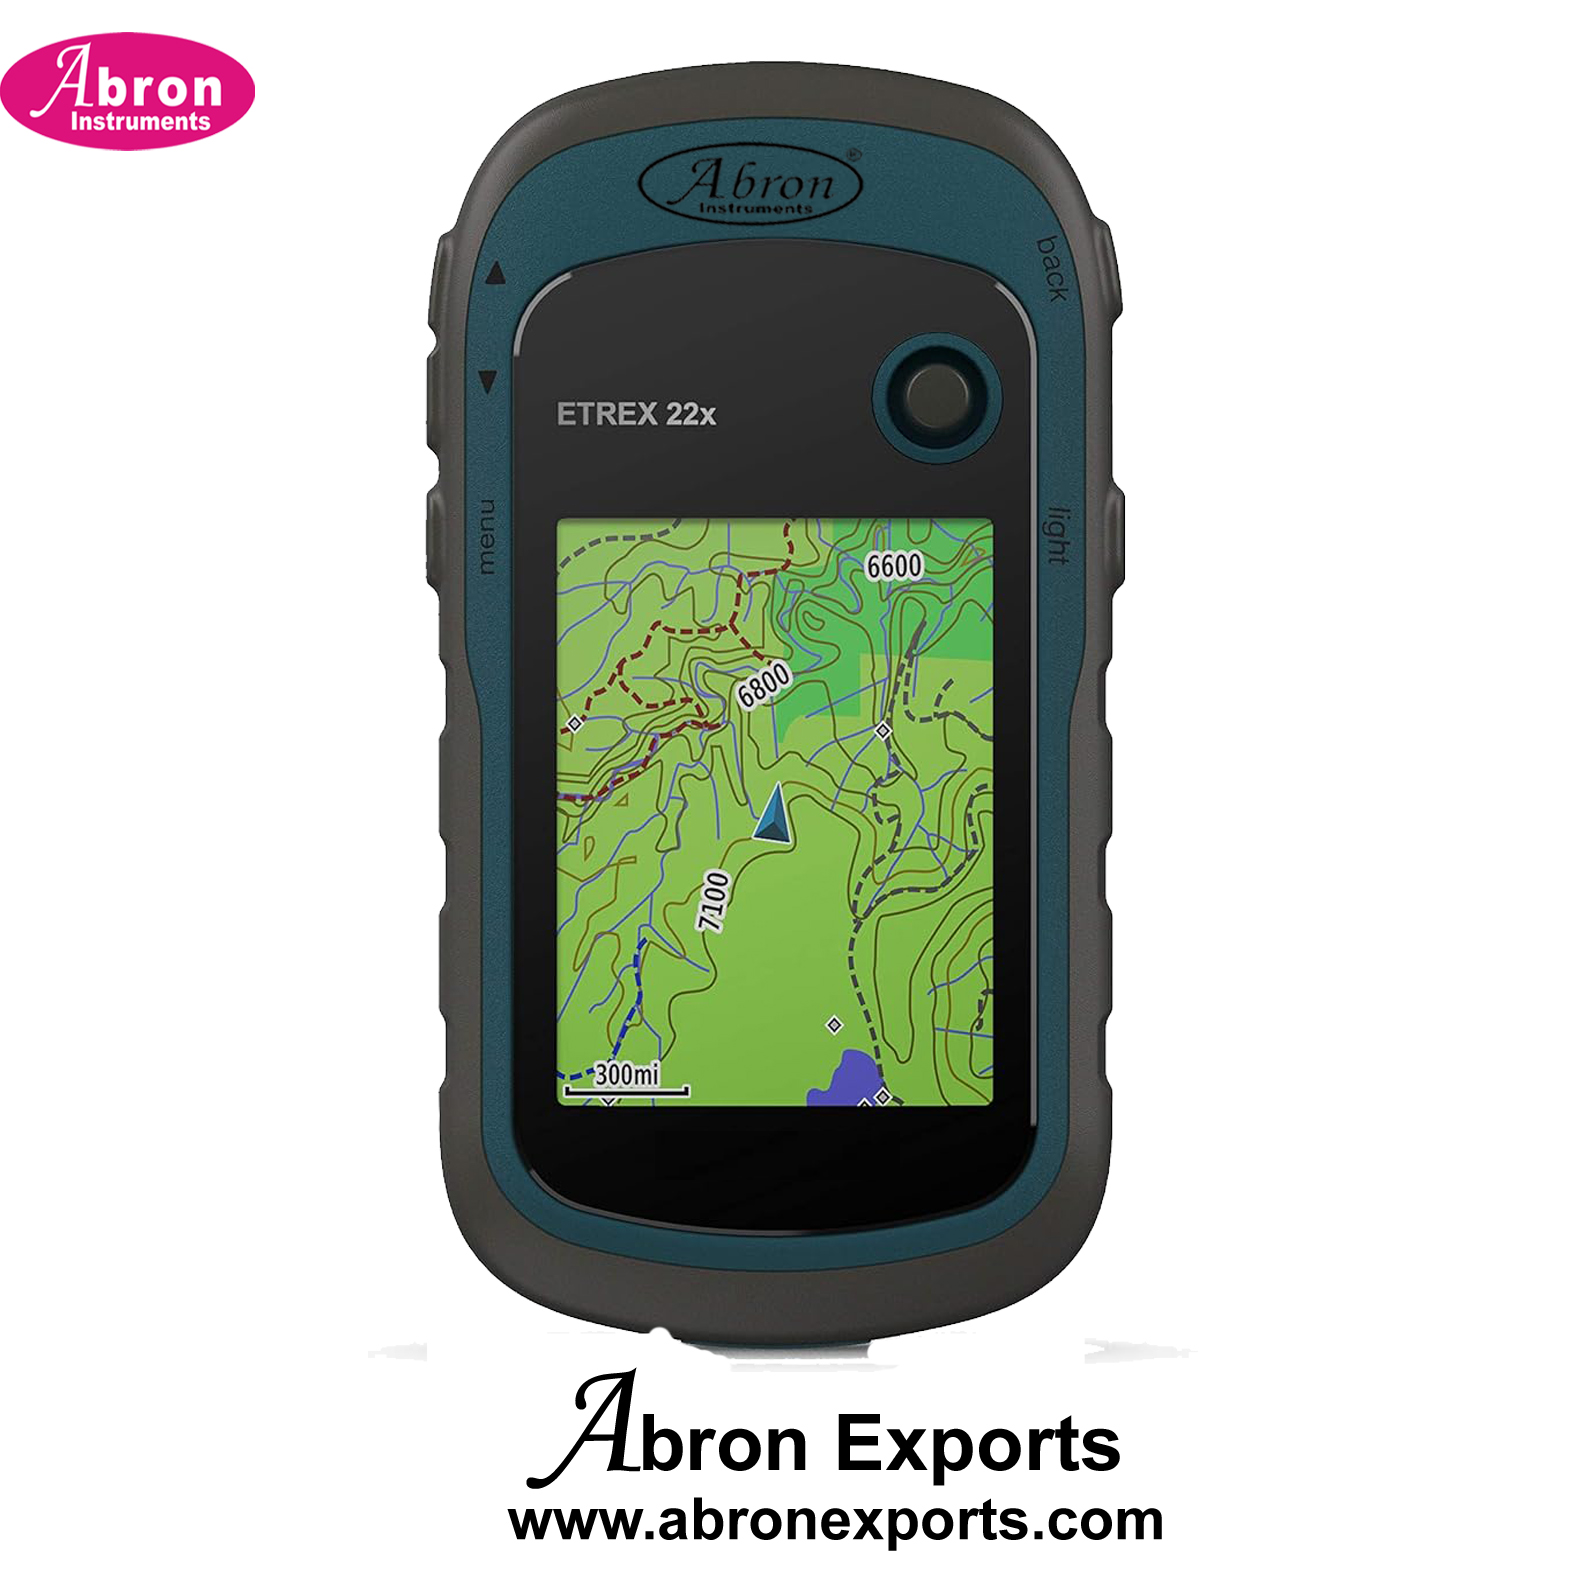 GPS Etrex 22X Handheld GPS 2.2 inch color Display 240 x 320 display Preloaded TopoActive maps hiking SD Card AG-290E22X